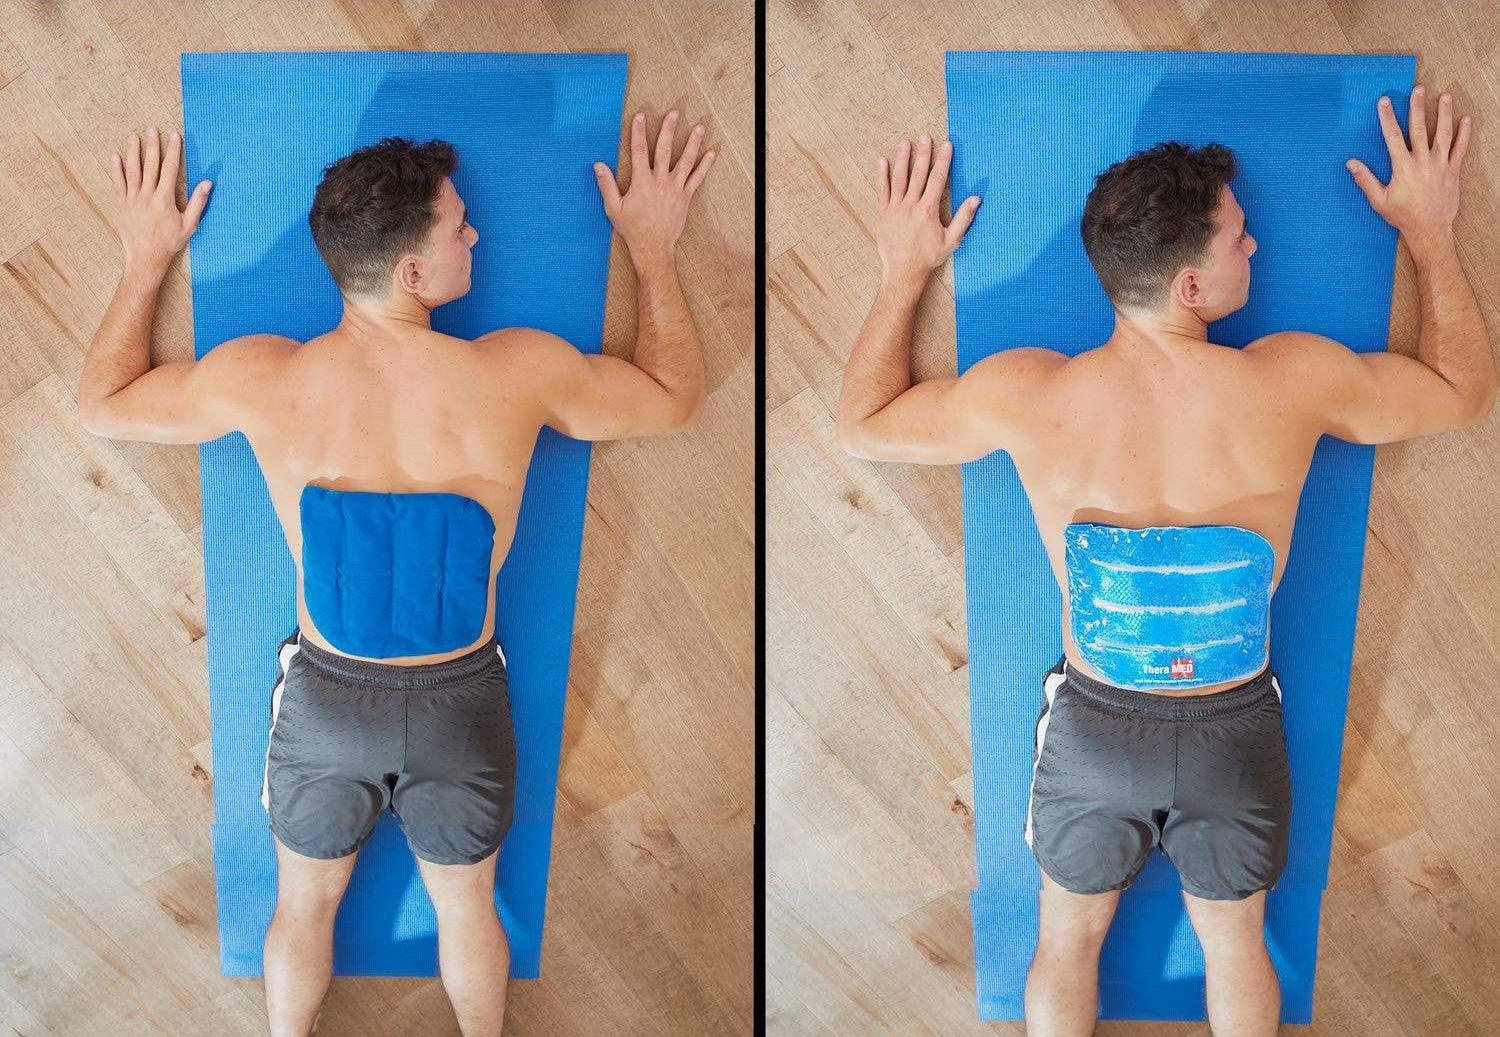 A man on his stomach with a hot/cold wrap on his back